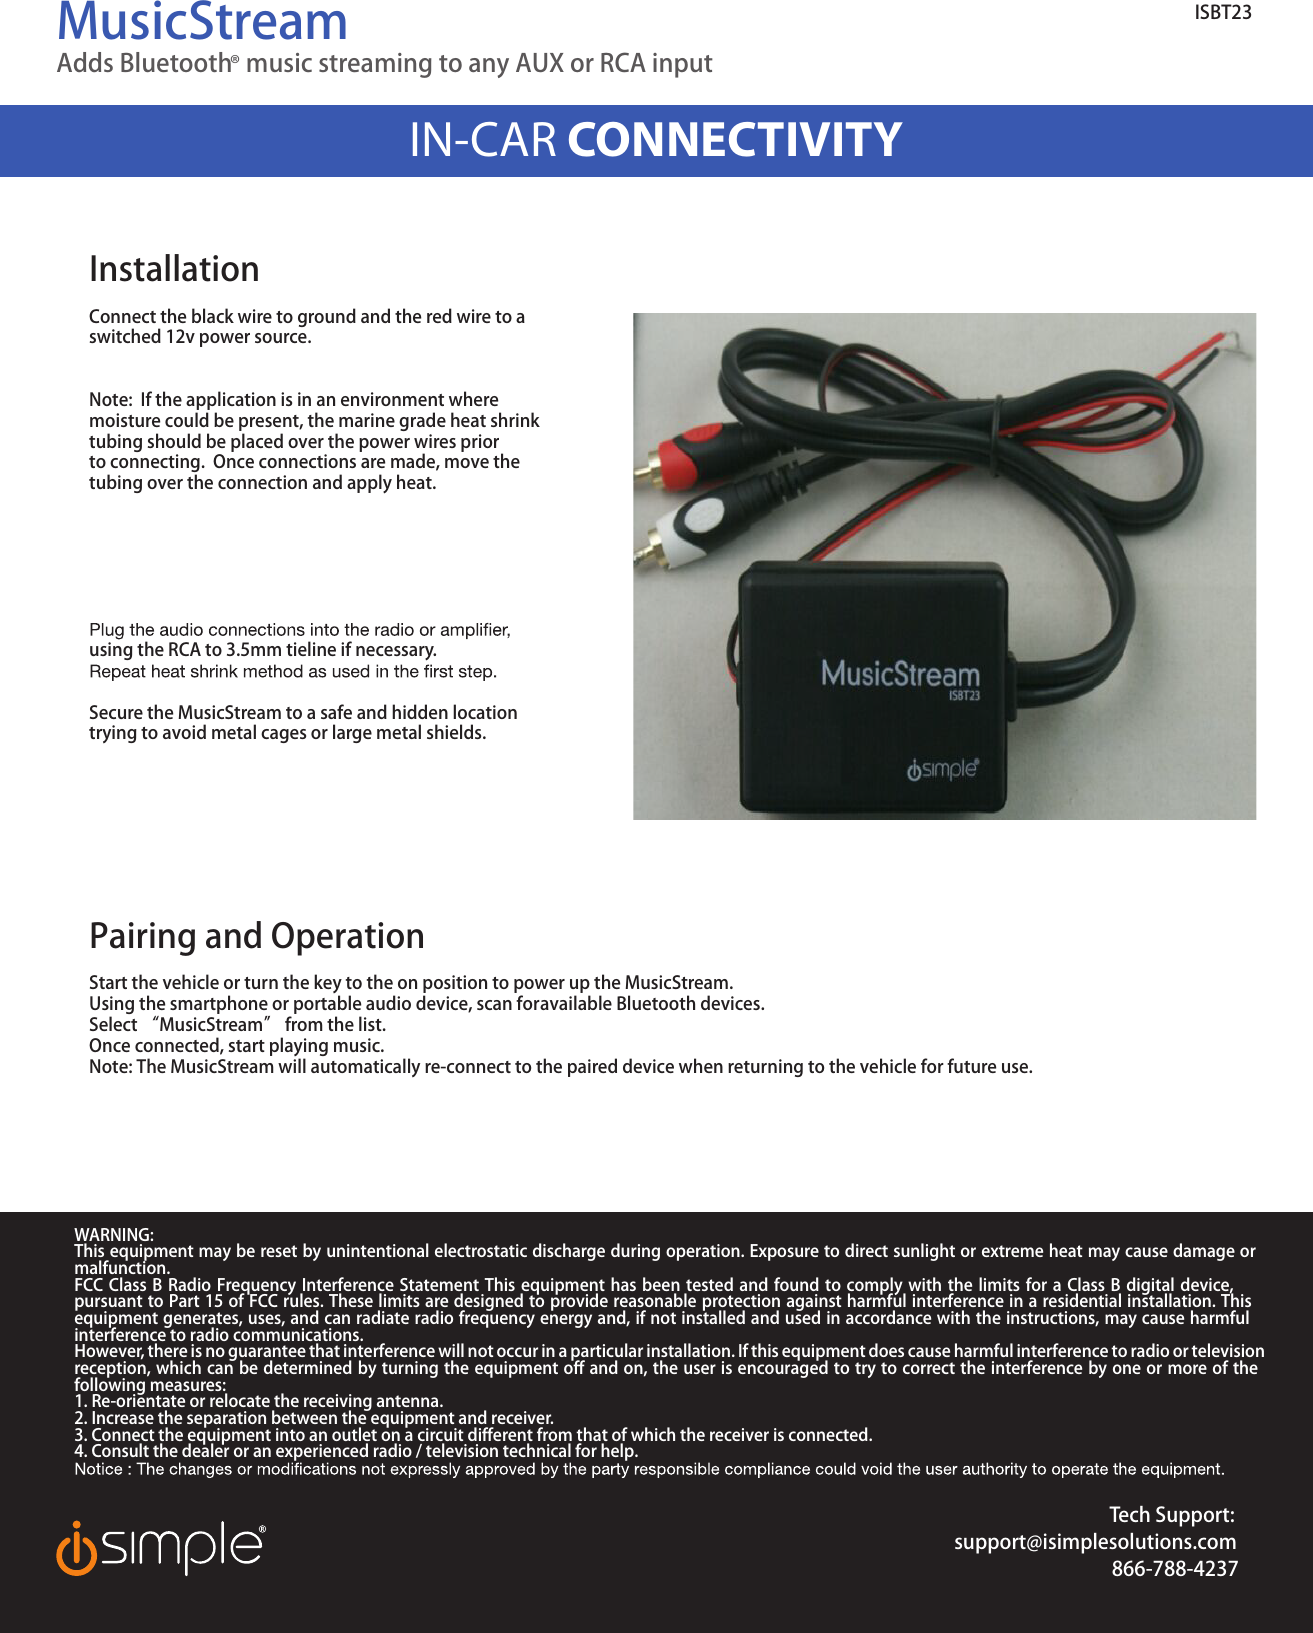 MusicStreamAdds Bluetooth® music streaming to any AUX or RCA input IN-CAR CONNECTIVITYTech Support:support@isimplesolutions.com866-788-4237WARNING:This equipment may be reset by unintentional electrostatic discharge during operation. Exposure to direct sunlight or extreme heat may cause damage or malfunction.FCC Class B Radio Frequency Interference Statement This equipment has been tested and found to comply with the limits for a Class B digital device, pursuant to Part 15 of FCC rules. These limits are designed to provide reasonable protection against harmful interference in a residential installation. This equipment generates, uses, and can radiate radio frequency energy and, if not installed and used in accordance with the instructions, may cause harmful interference to radio communications.However, there is no guarantee that interference will not occur in a particular installation. If this equipment does cause harmful interference to radio or television reception, which can be determined by turning the equipment off and on, the user is encouraged to try to correct the interference by one or more of the following measures:1. Re-orientate or relocate the receiving antenna. 2. Increase the separation between the equipment and receiver. 3. Connect the equipment into an outlet on a circuit different from that of which the receiver is connected. 4. Consult the dealer or an experienced radio / television technical for help.ISBT23InstallationConnect the black wire to ground and the red wire to aswitched 12v power source.Note:  If the application is in an environment where moisture could be present, the marine grade heat shrinktubing should be placed over the power wires prior to connecting.  Once connections are made, move the tubing over the connection and apply heat.using the RCA to 3.5mm tieline if necessary.  Secure the MusicStream to a safe and hidden location trying to avoid metal cages or large metal shields.  Pairing and OperationStart the vehicle or turn the key to the on position to power up the MusicStream.Using the smartphone or portable audio device, scan for available Bluetooth devices.Select “MusicStream” from the list.Once connected, start playing music.  Note: The MusicStream will automatically re-connect to the paired device when returning to the vehicle for future use. 